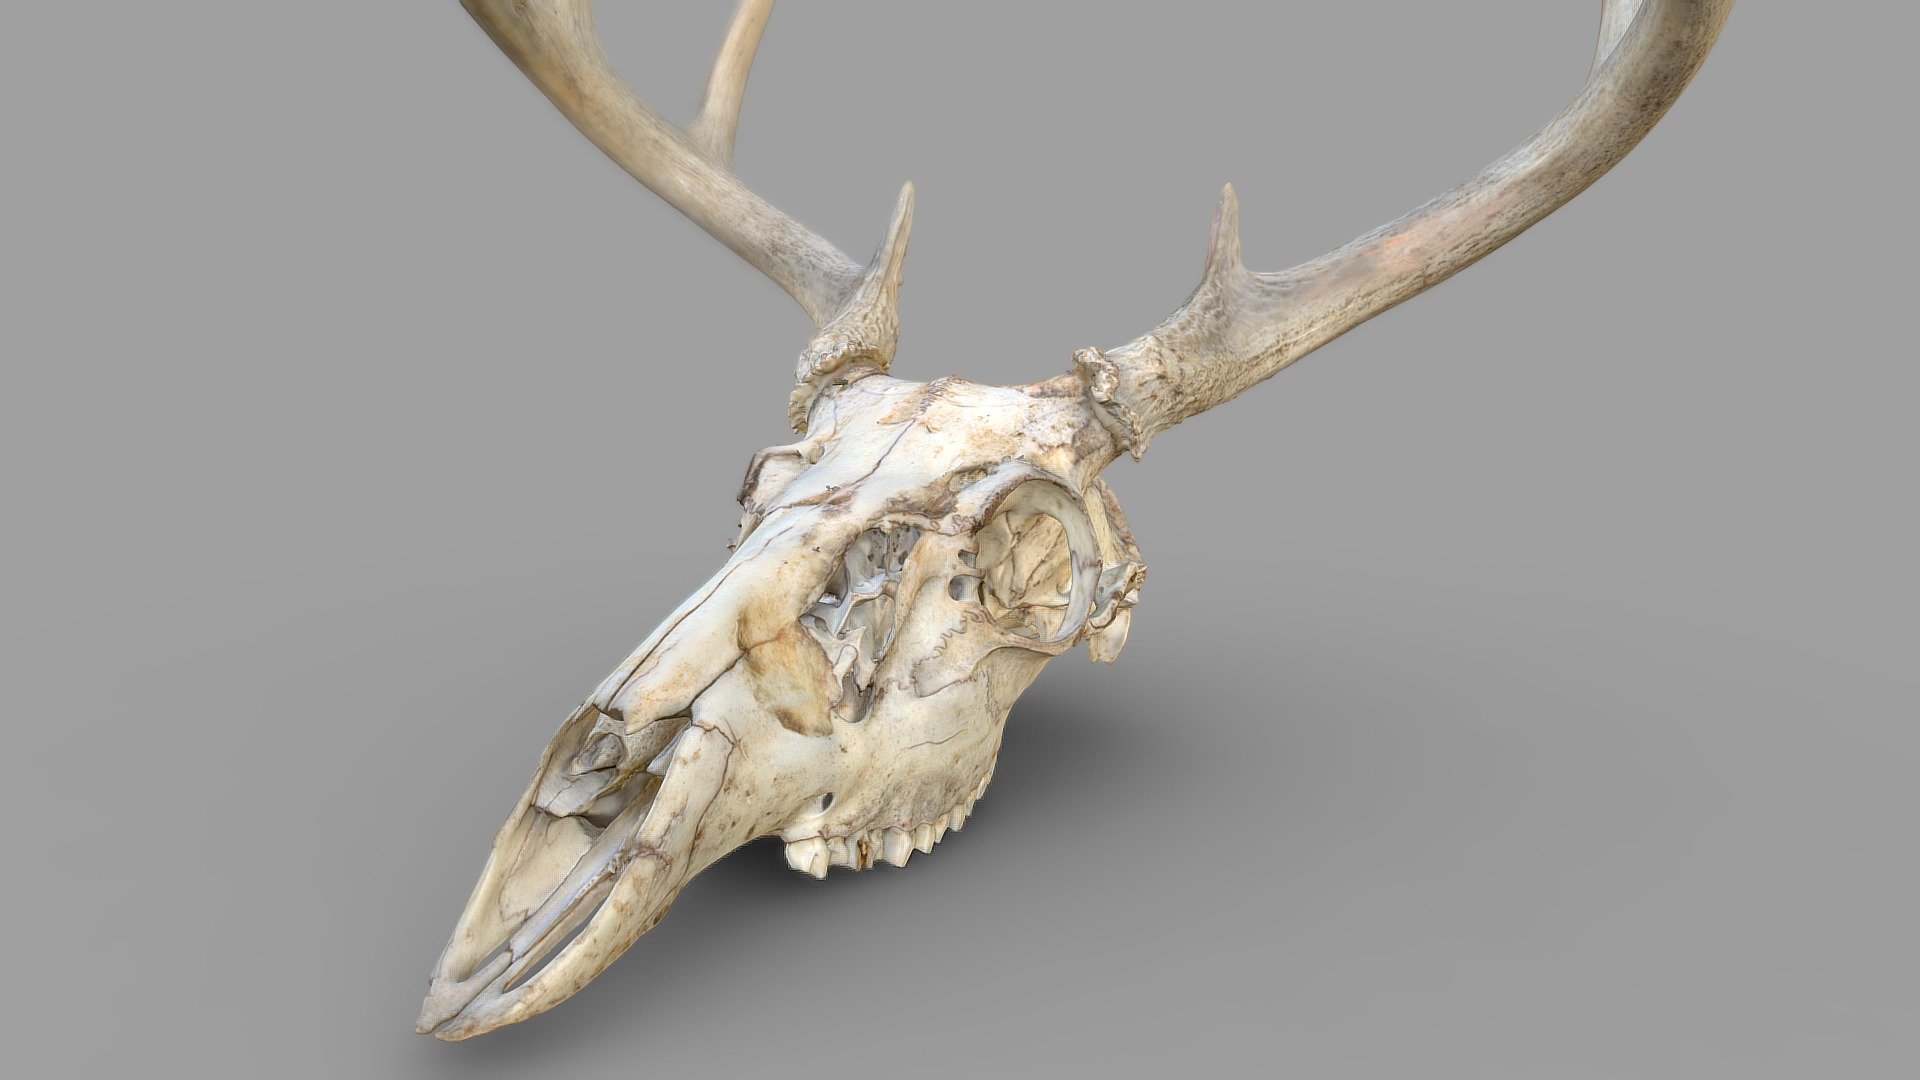 Deer skull scanned with the Artec Space Spider 3D scanner. Time to scan: about 20 minutes. Time to process to texturized OBJ: about 40 minutes. Original resolution mesh: 13 million+ polygons. Reduced to 450k for upload here 3d model